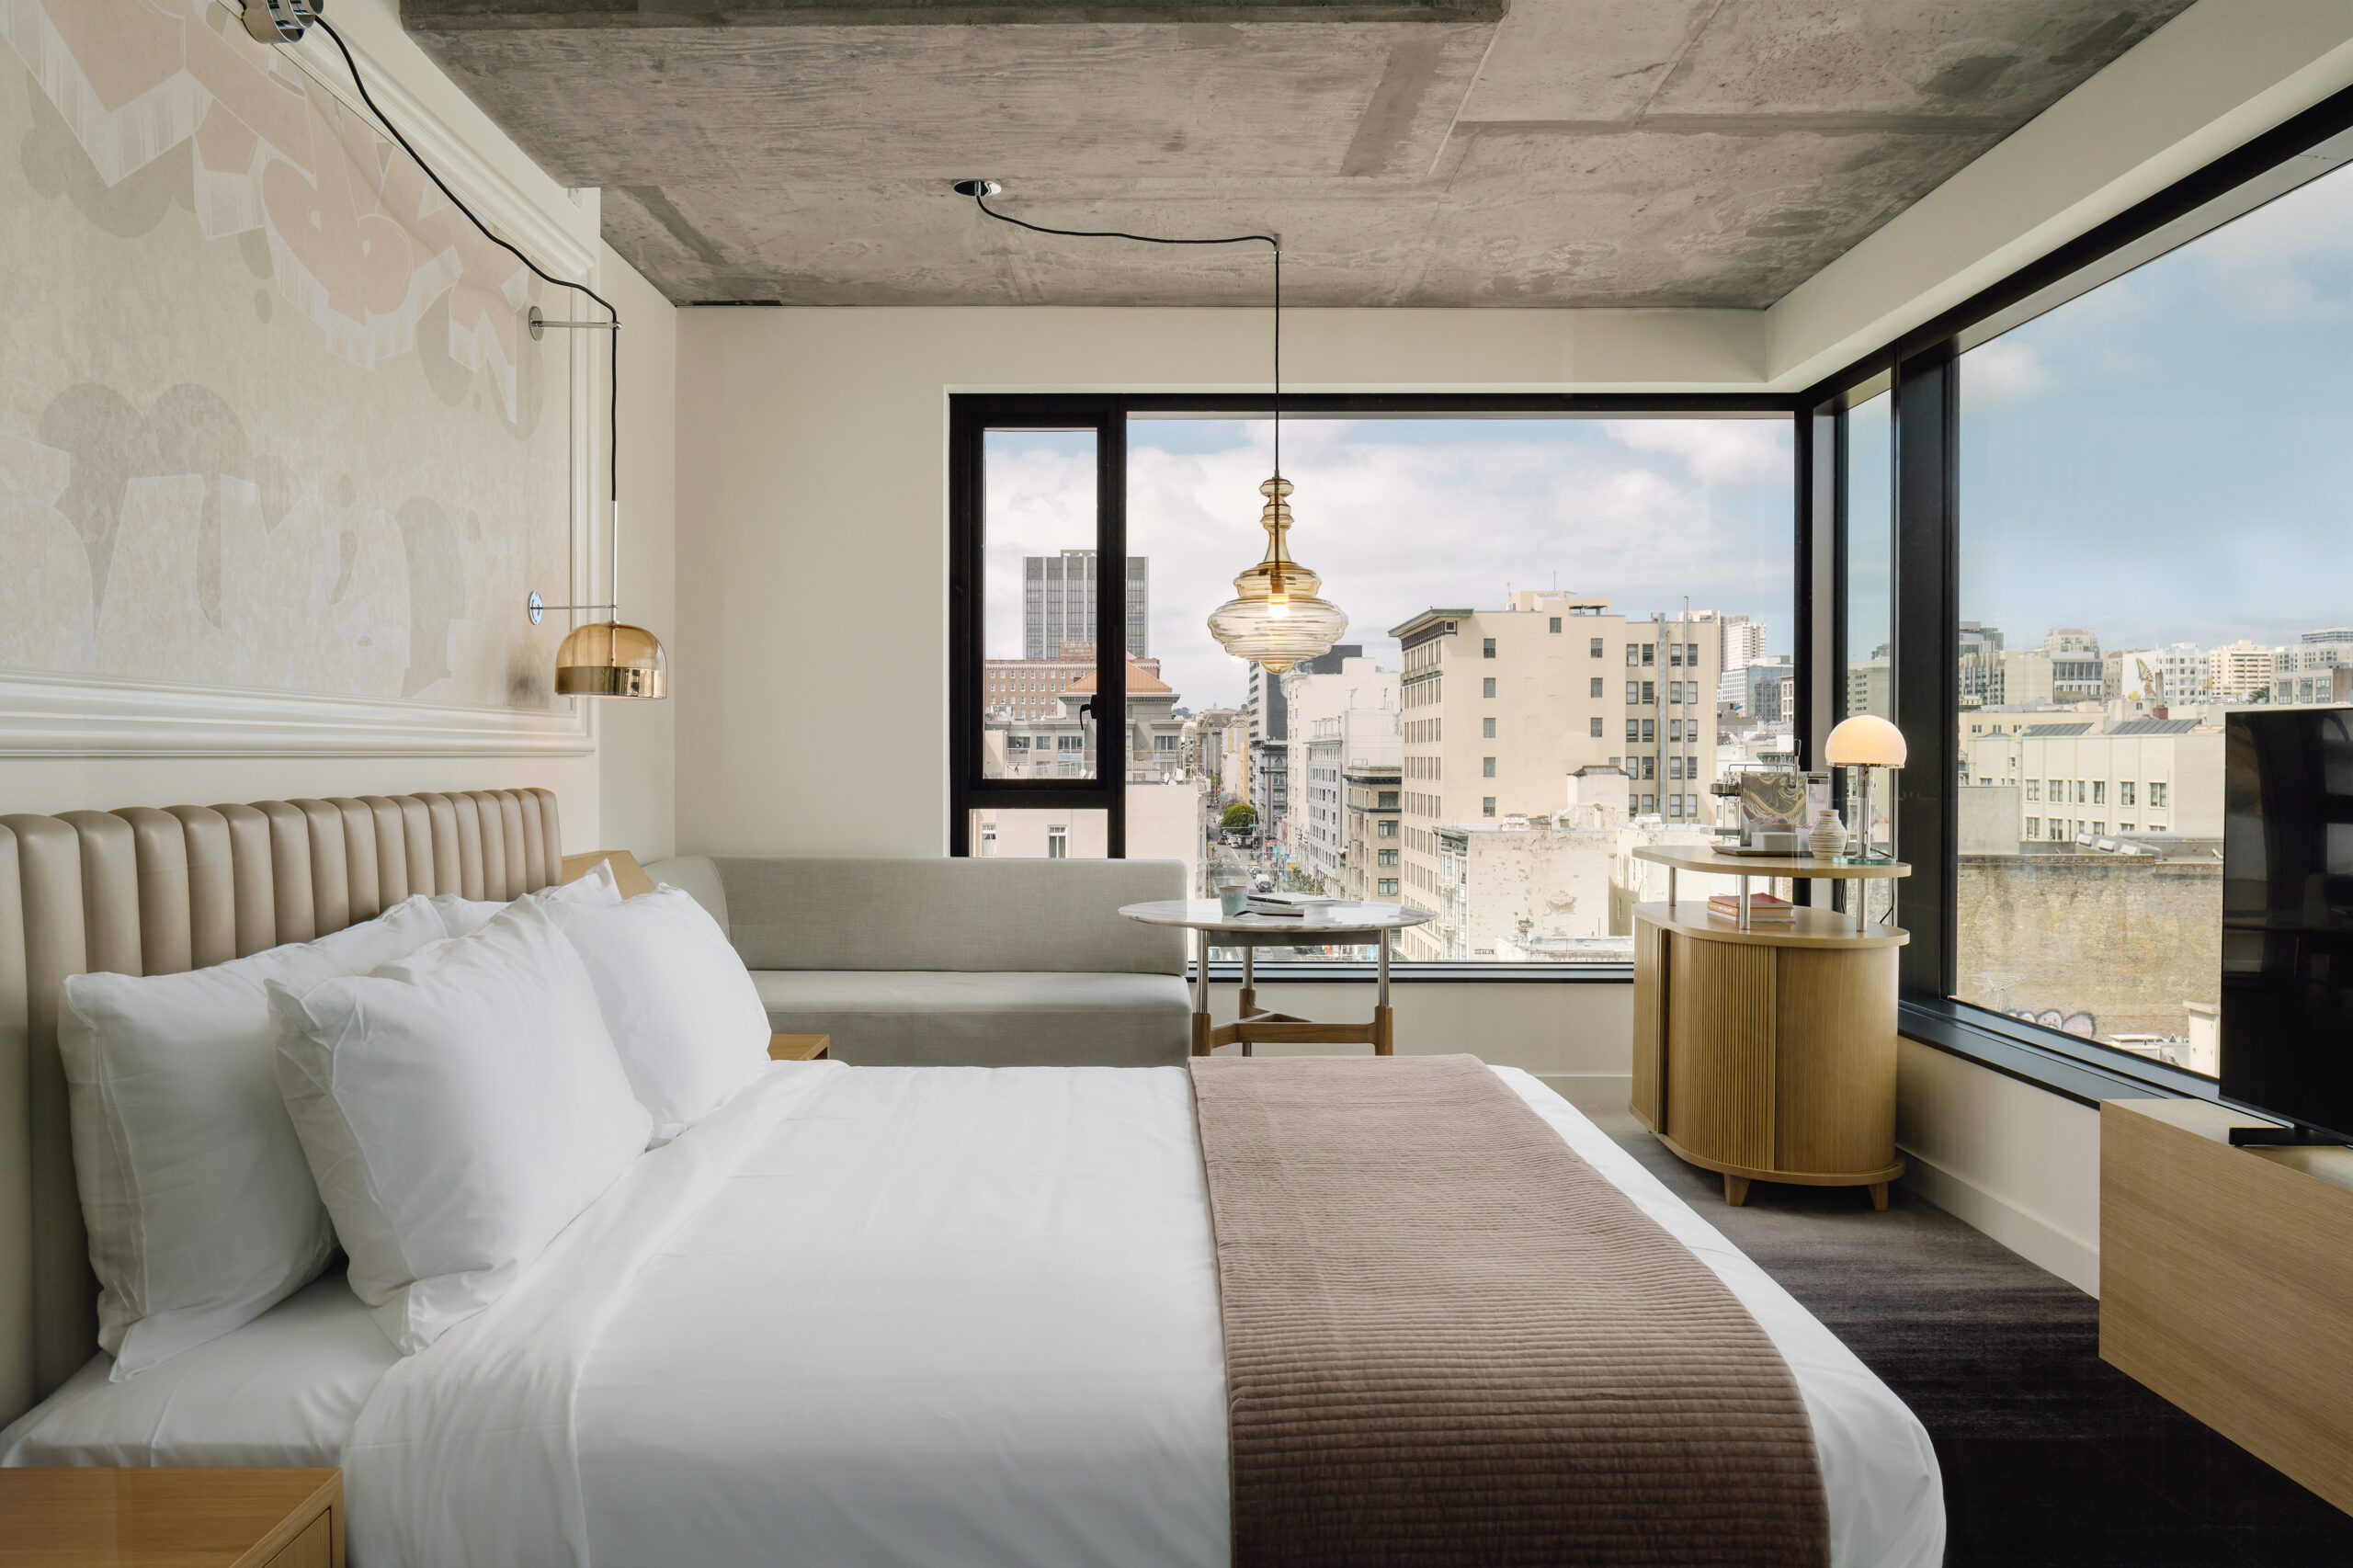 Staycation, Anyone? Escape to One of These 11 New and Remodeled SF Hotels